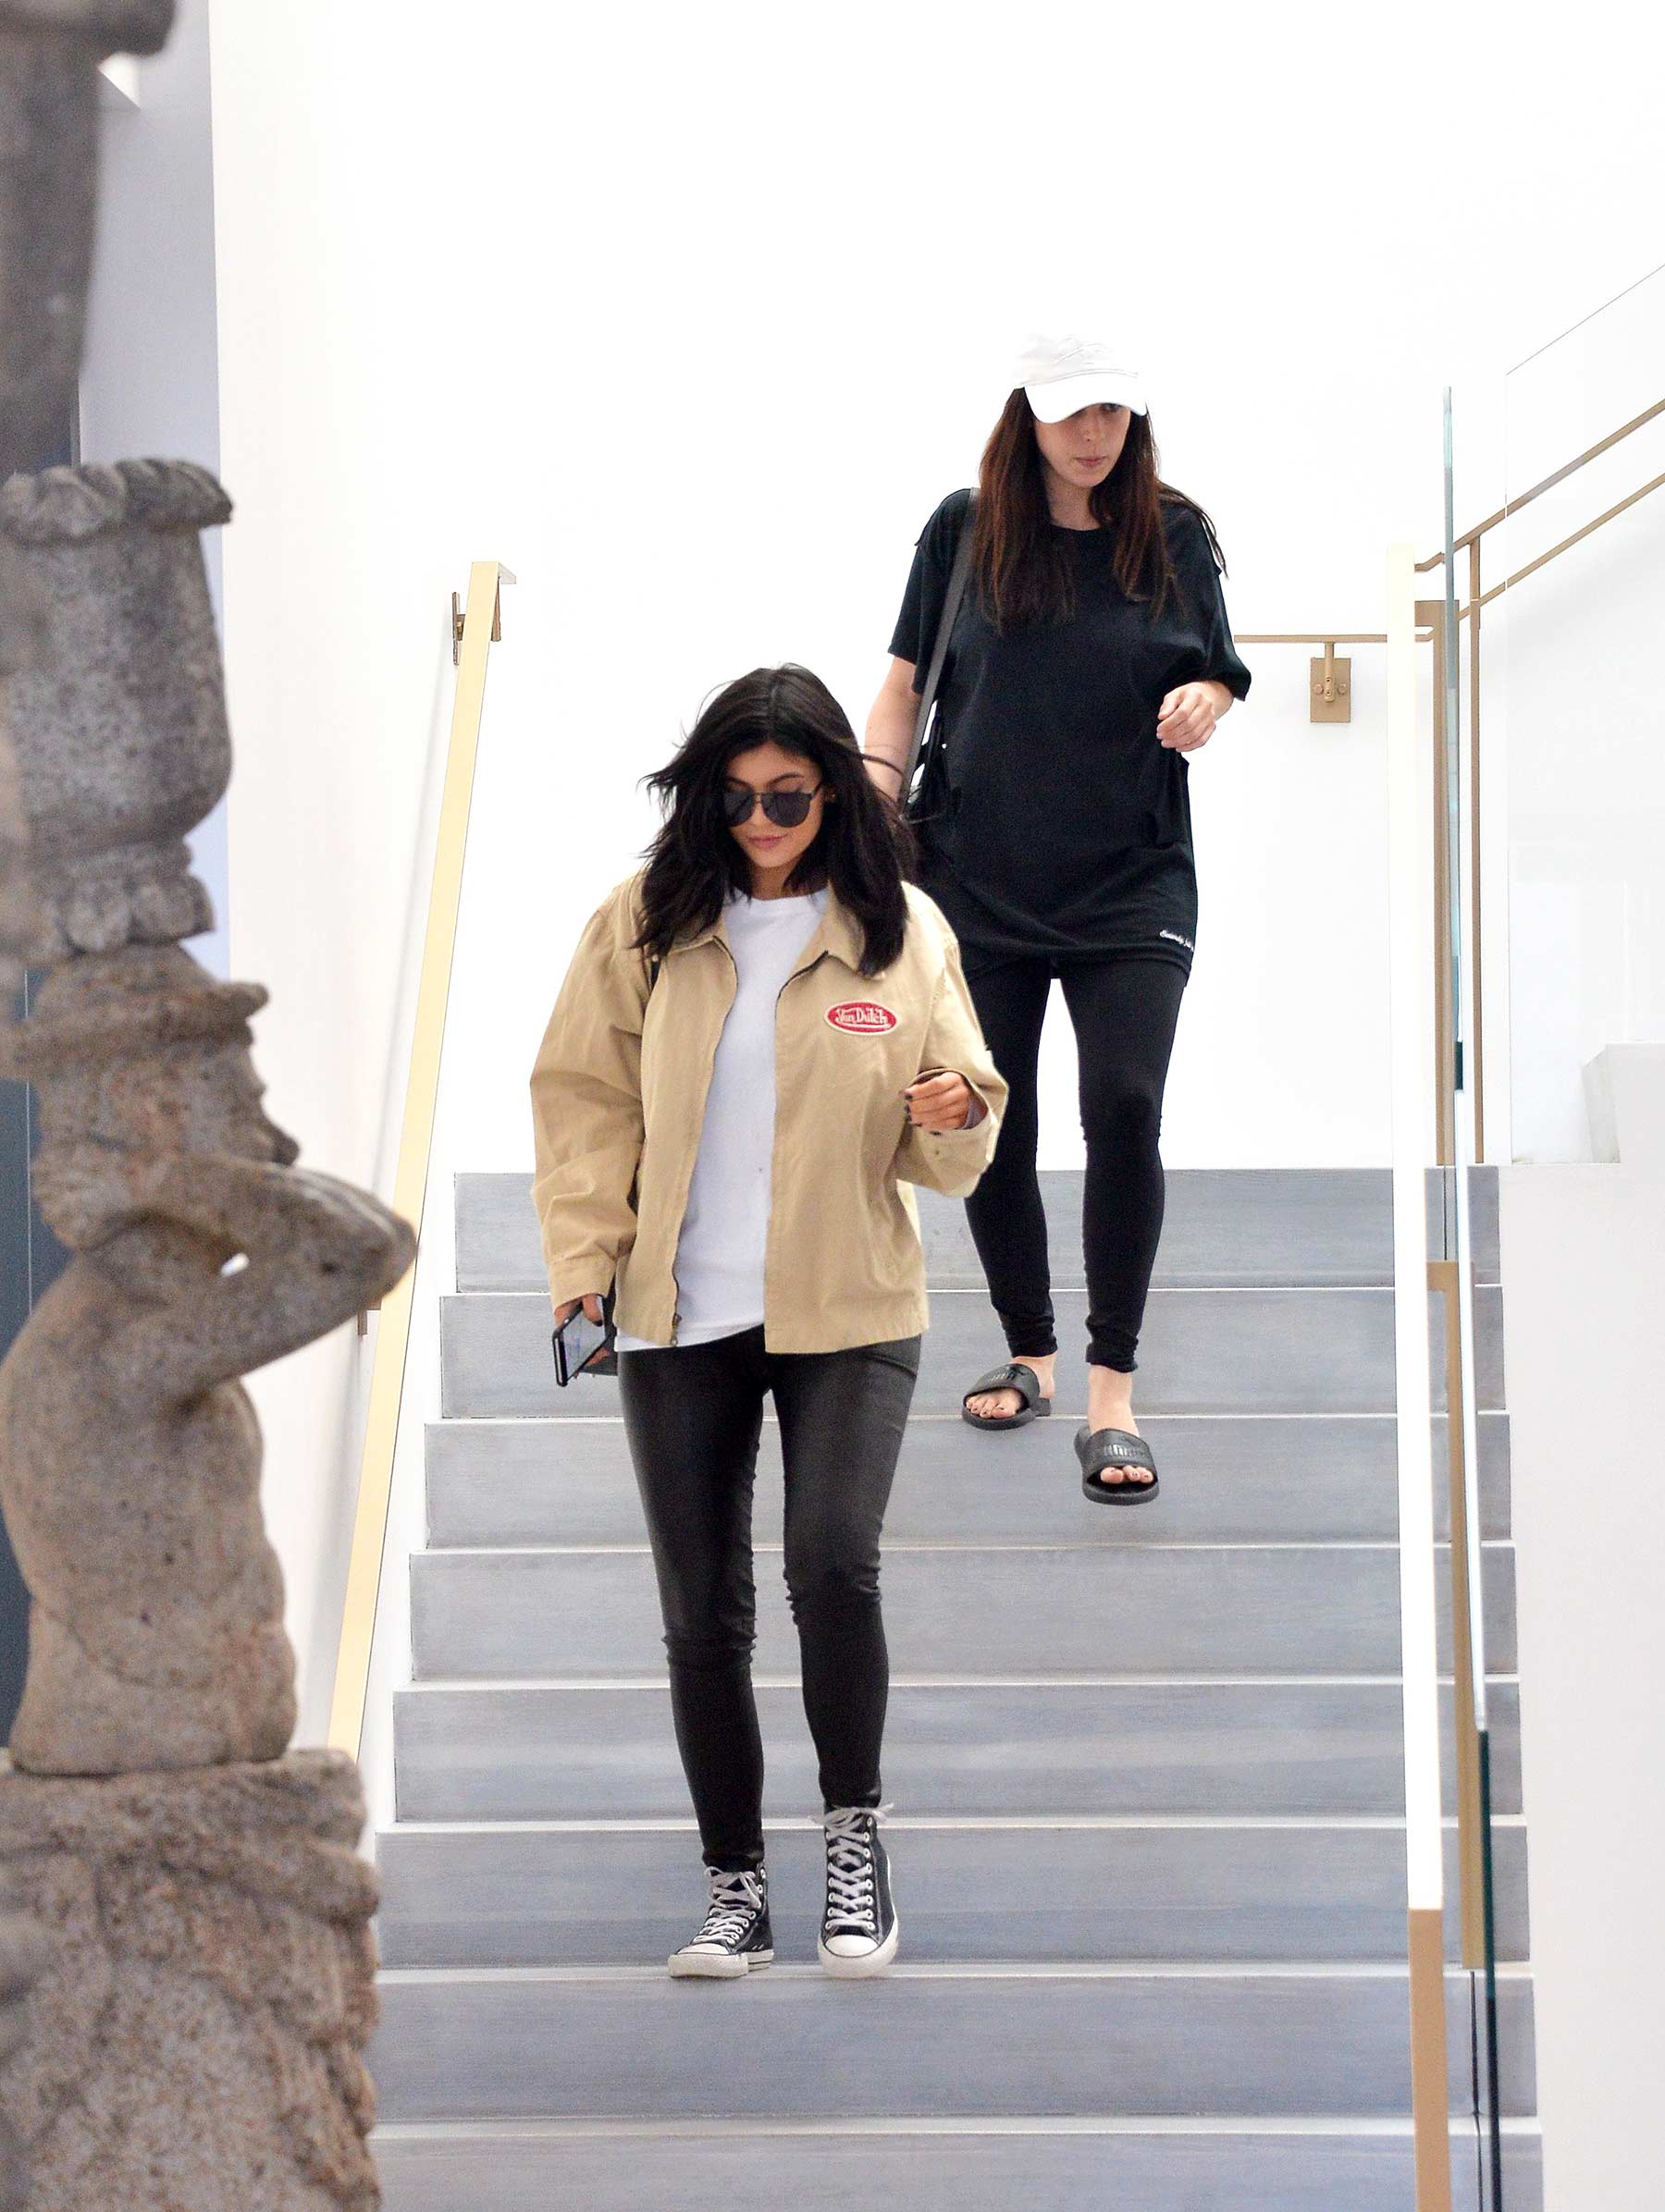 Kylie Jenner is spotted in Beverly Hills